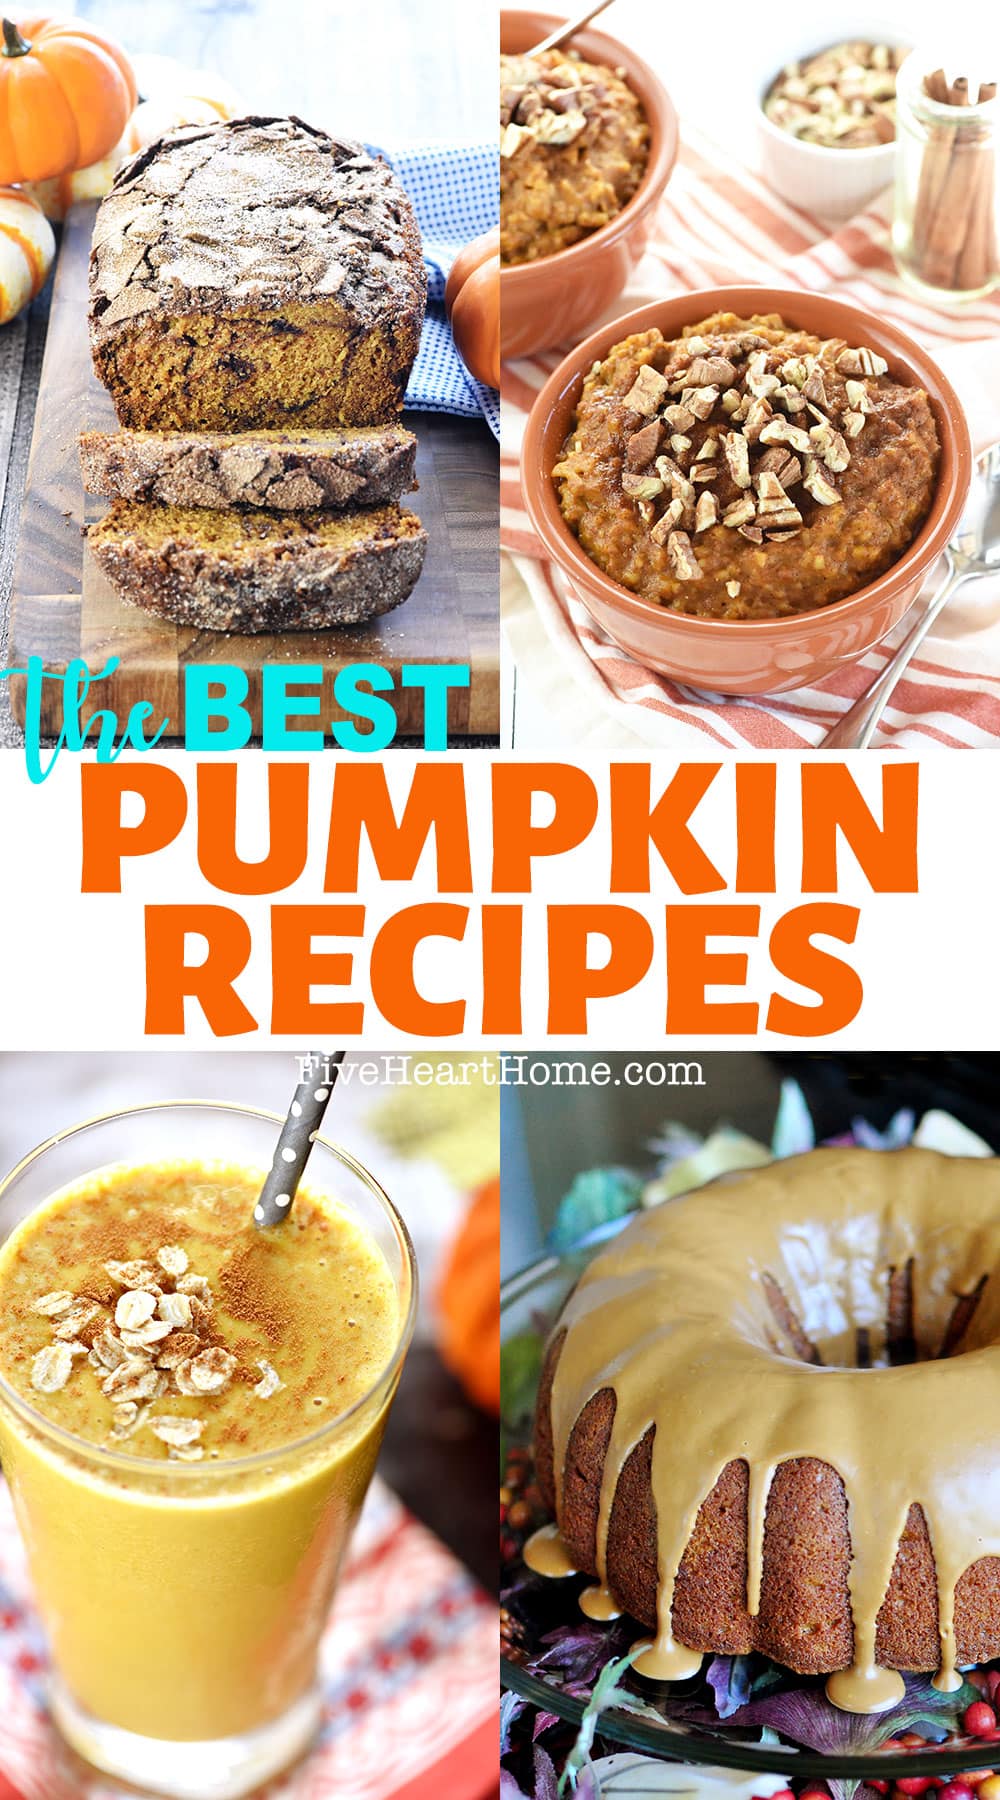 The BEST Pumpkin Recipes ~ embrace fall with a collection of amazing pumpkin recipes for breakfast, snack time, and dessert! These pumpkin recipes are not only delicious, but they're also easy to make! | FiveHeartHome.com via @fivehearthome